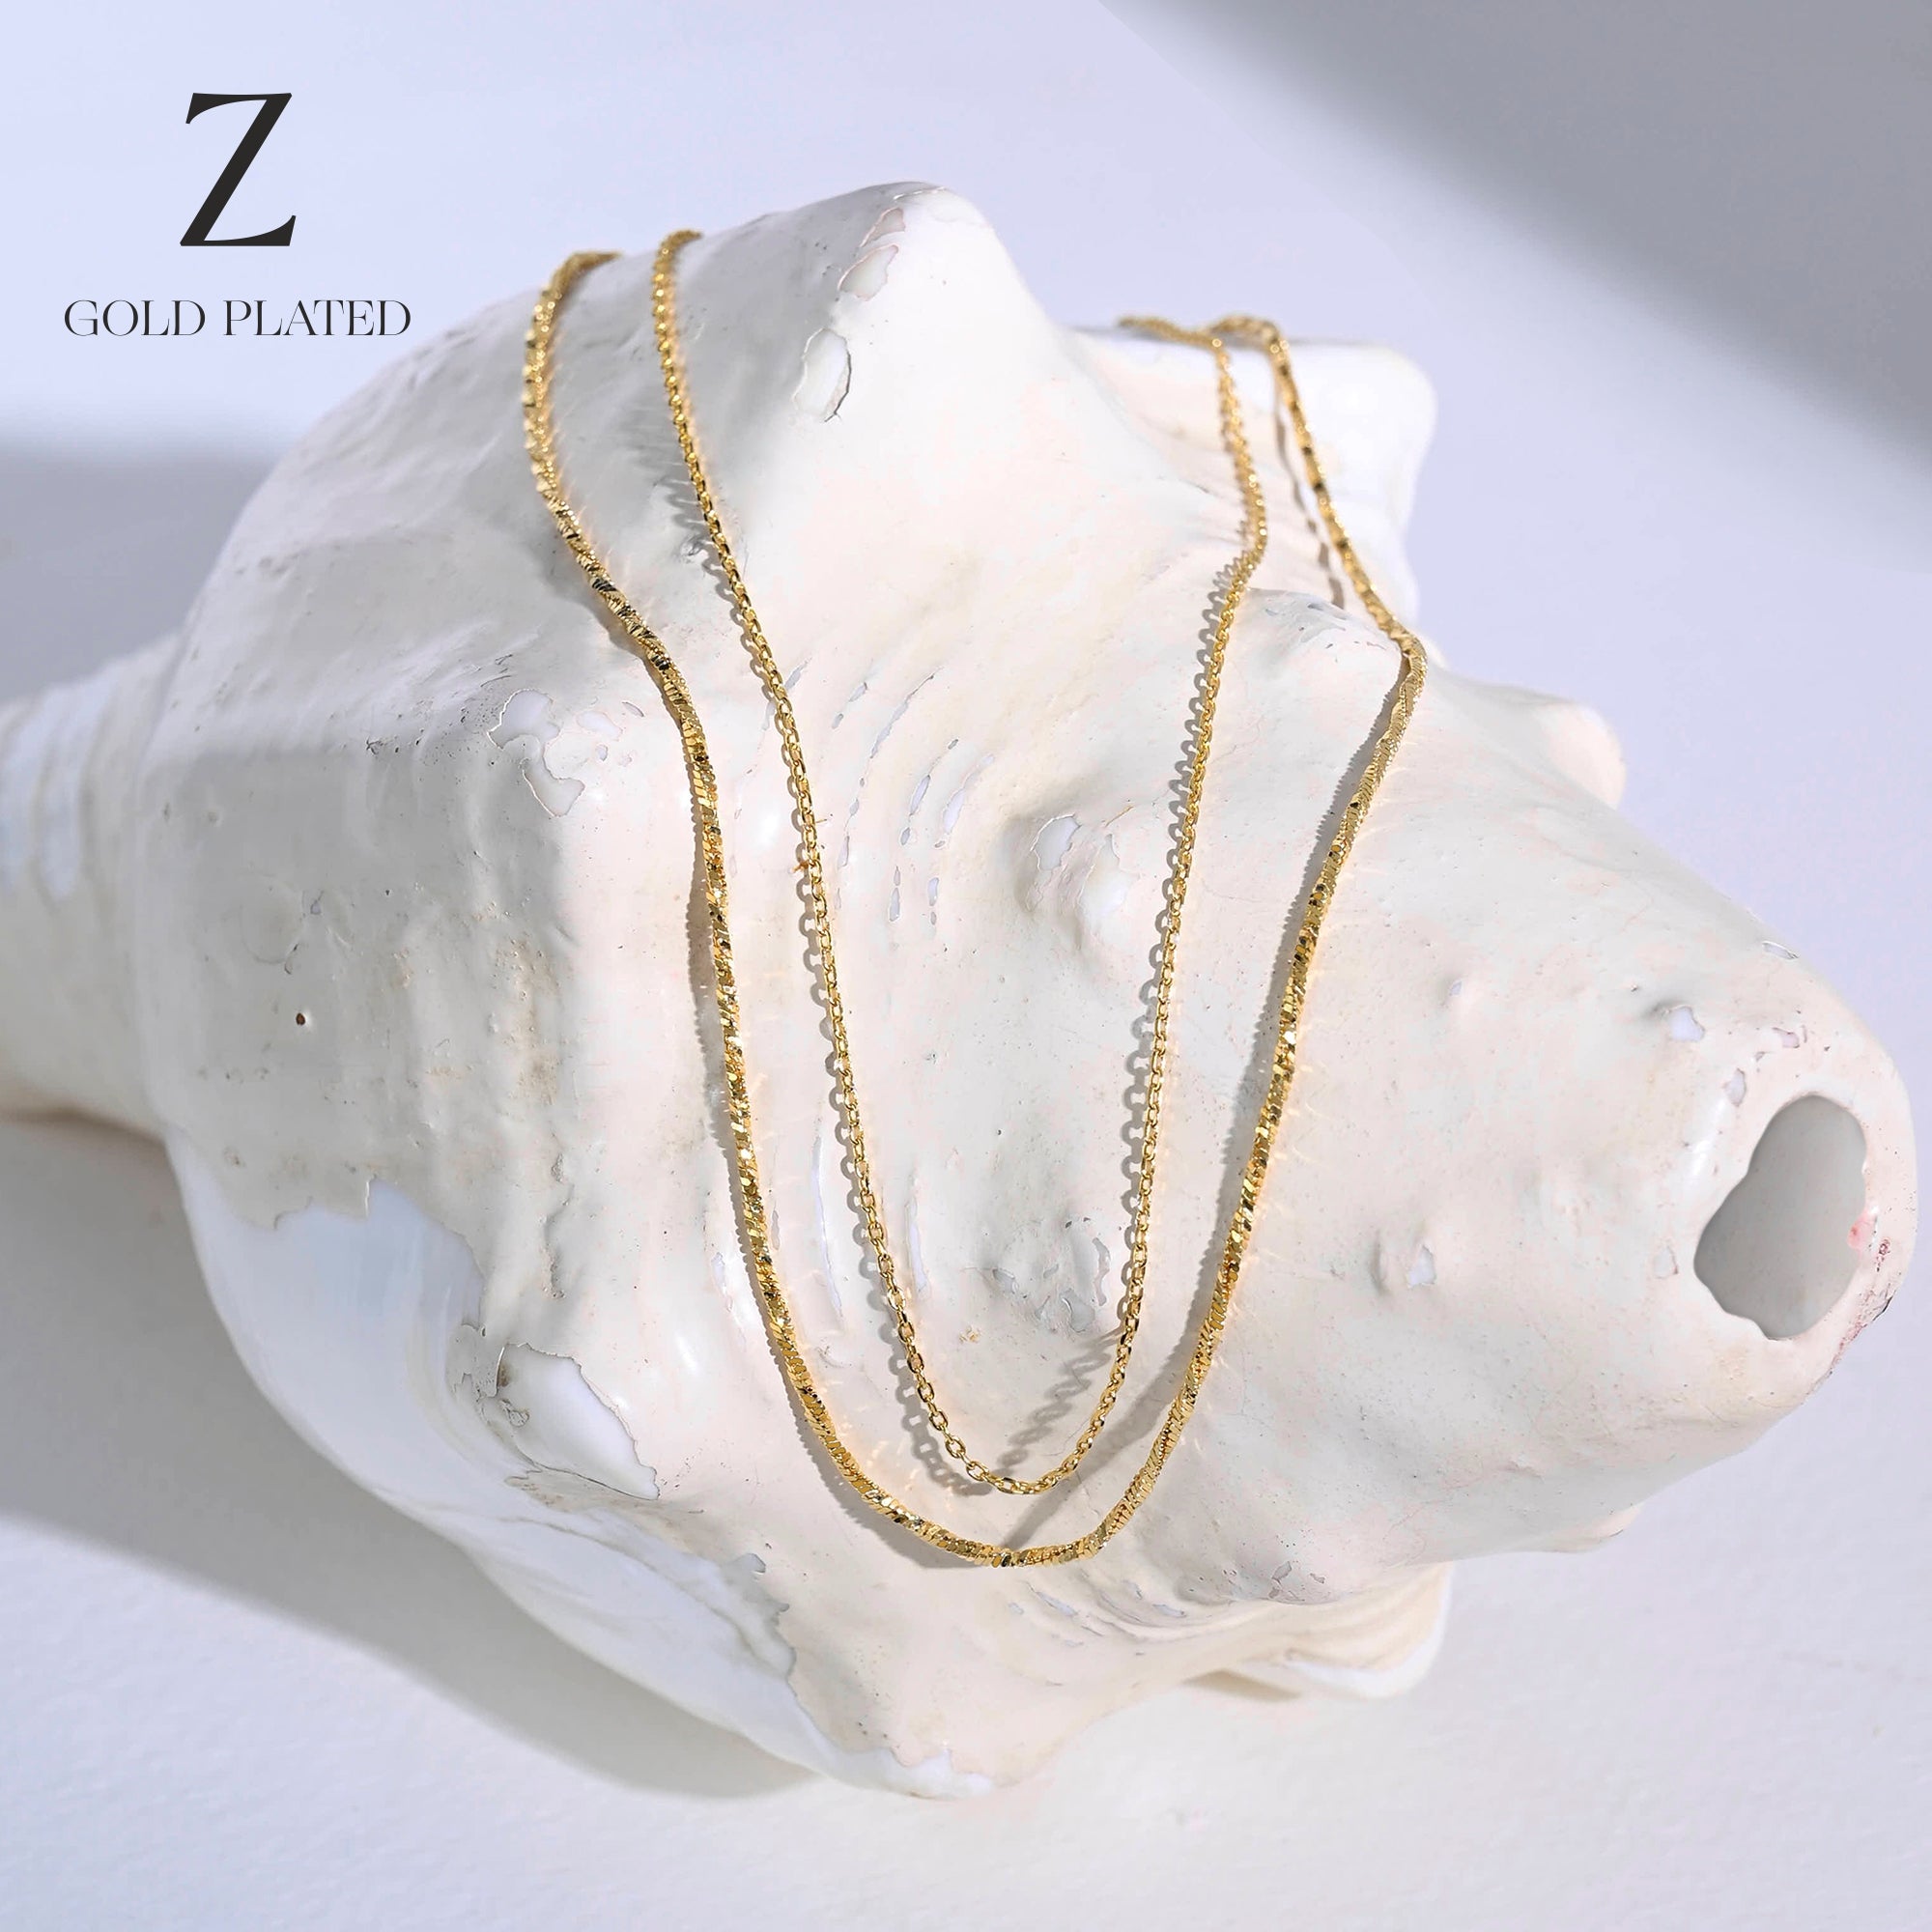 Real Gold-Plated Z Sparkle Chain Layered Necklace